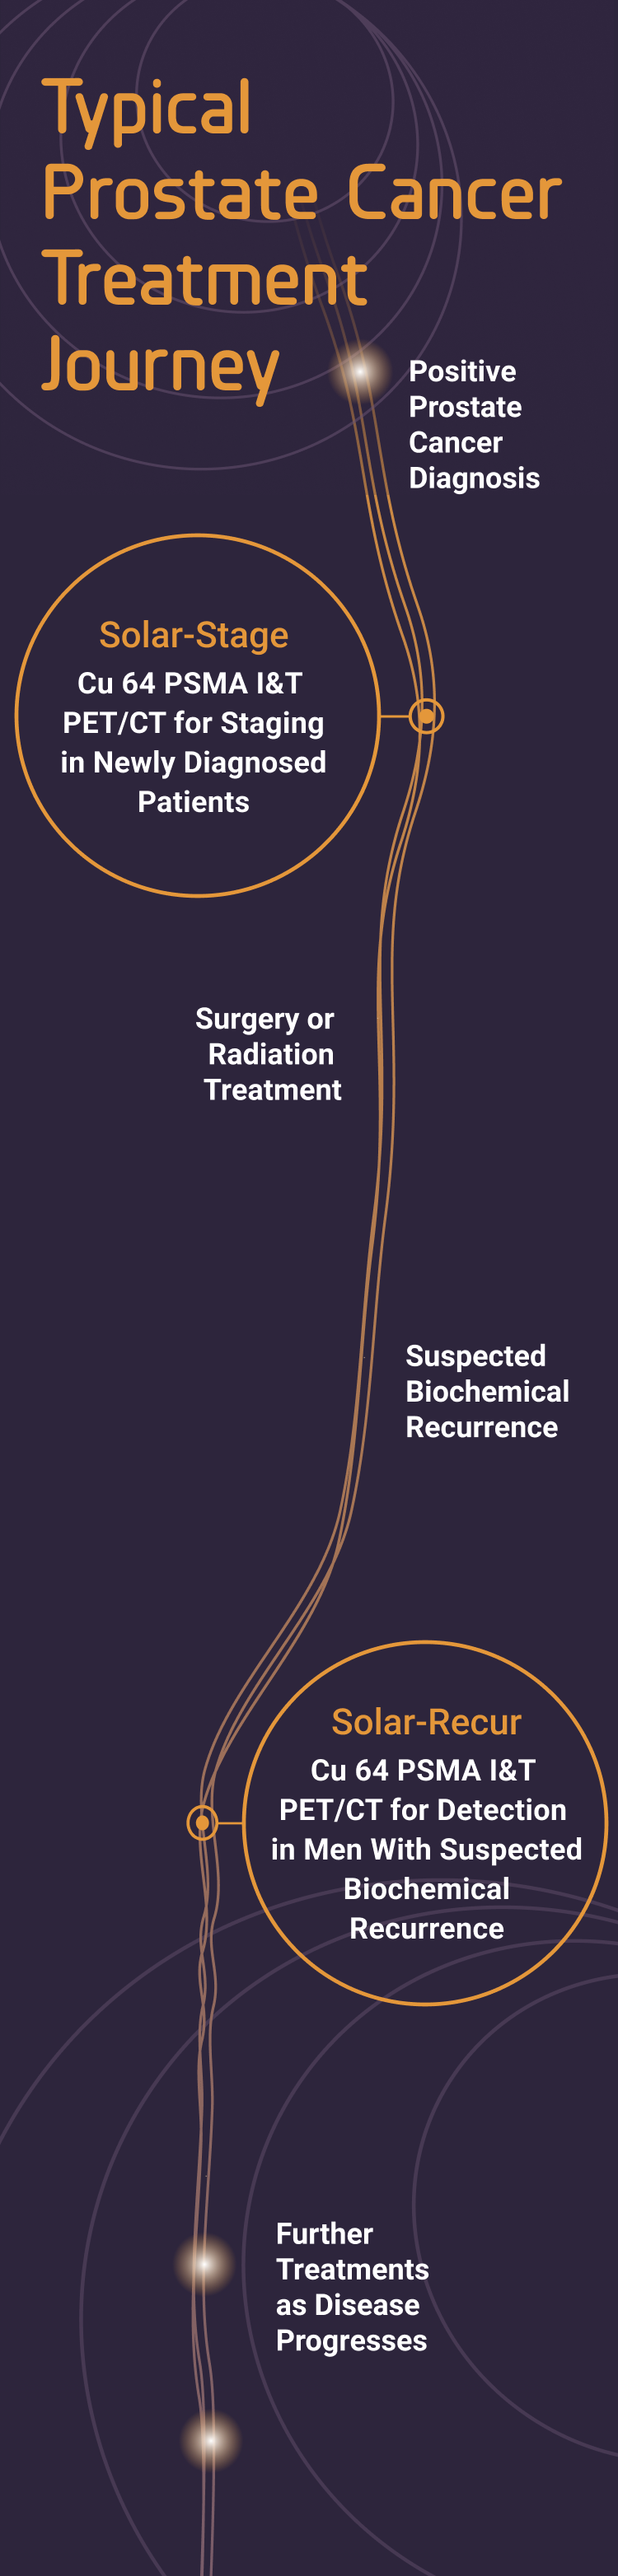 Typical prostate cancer treatment journey